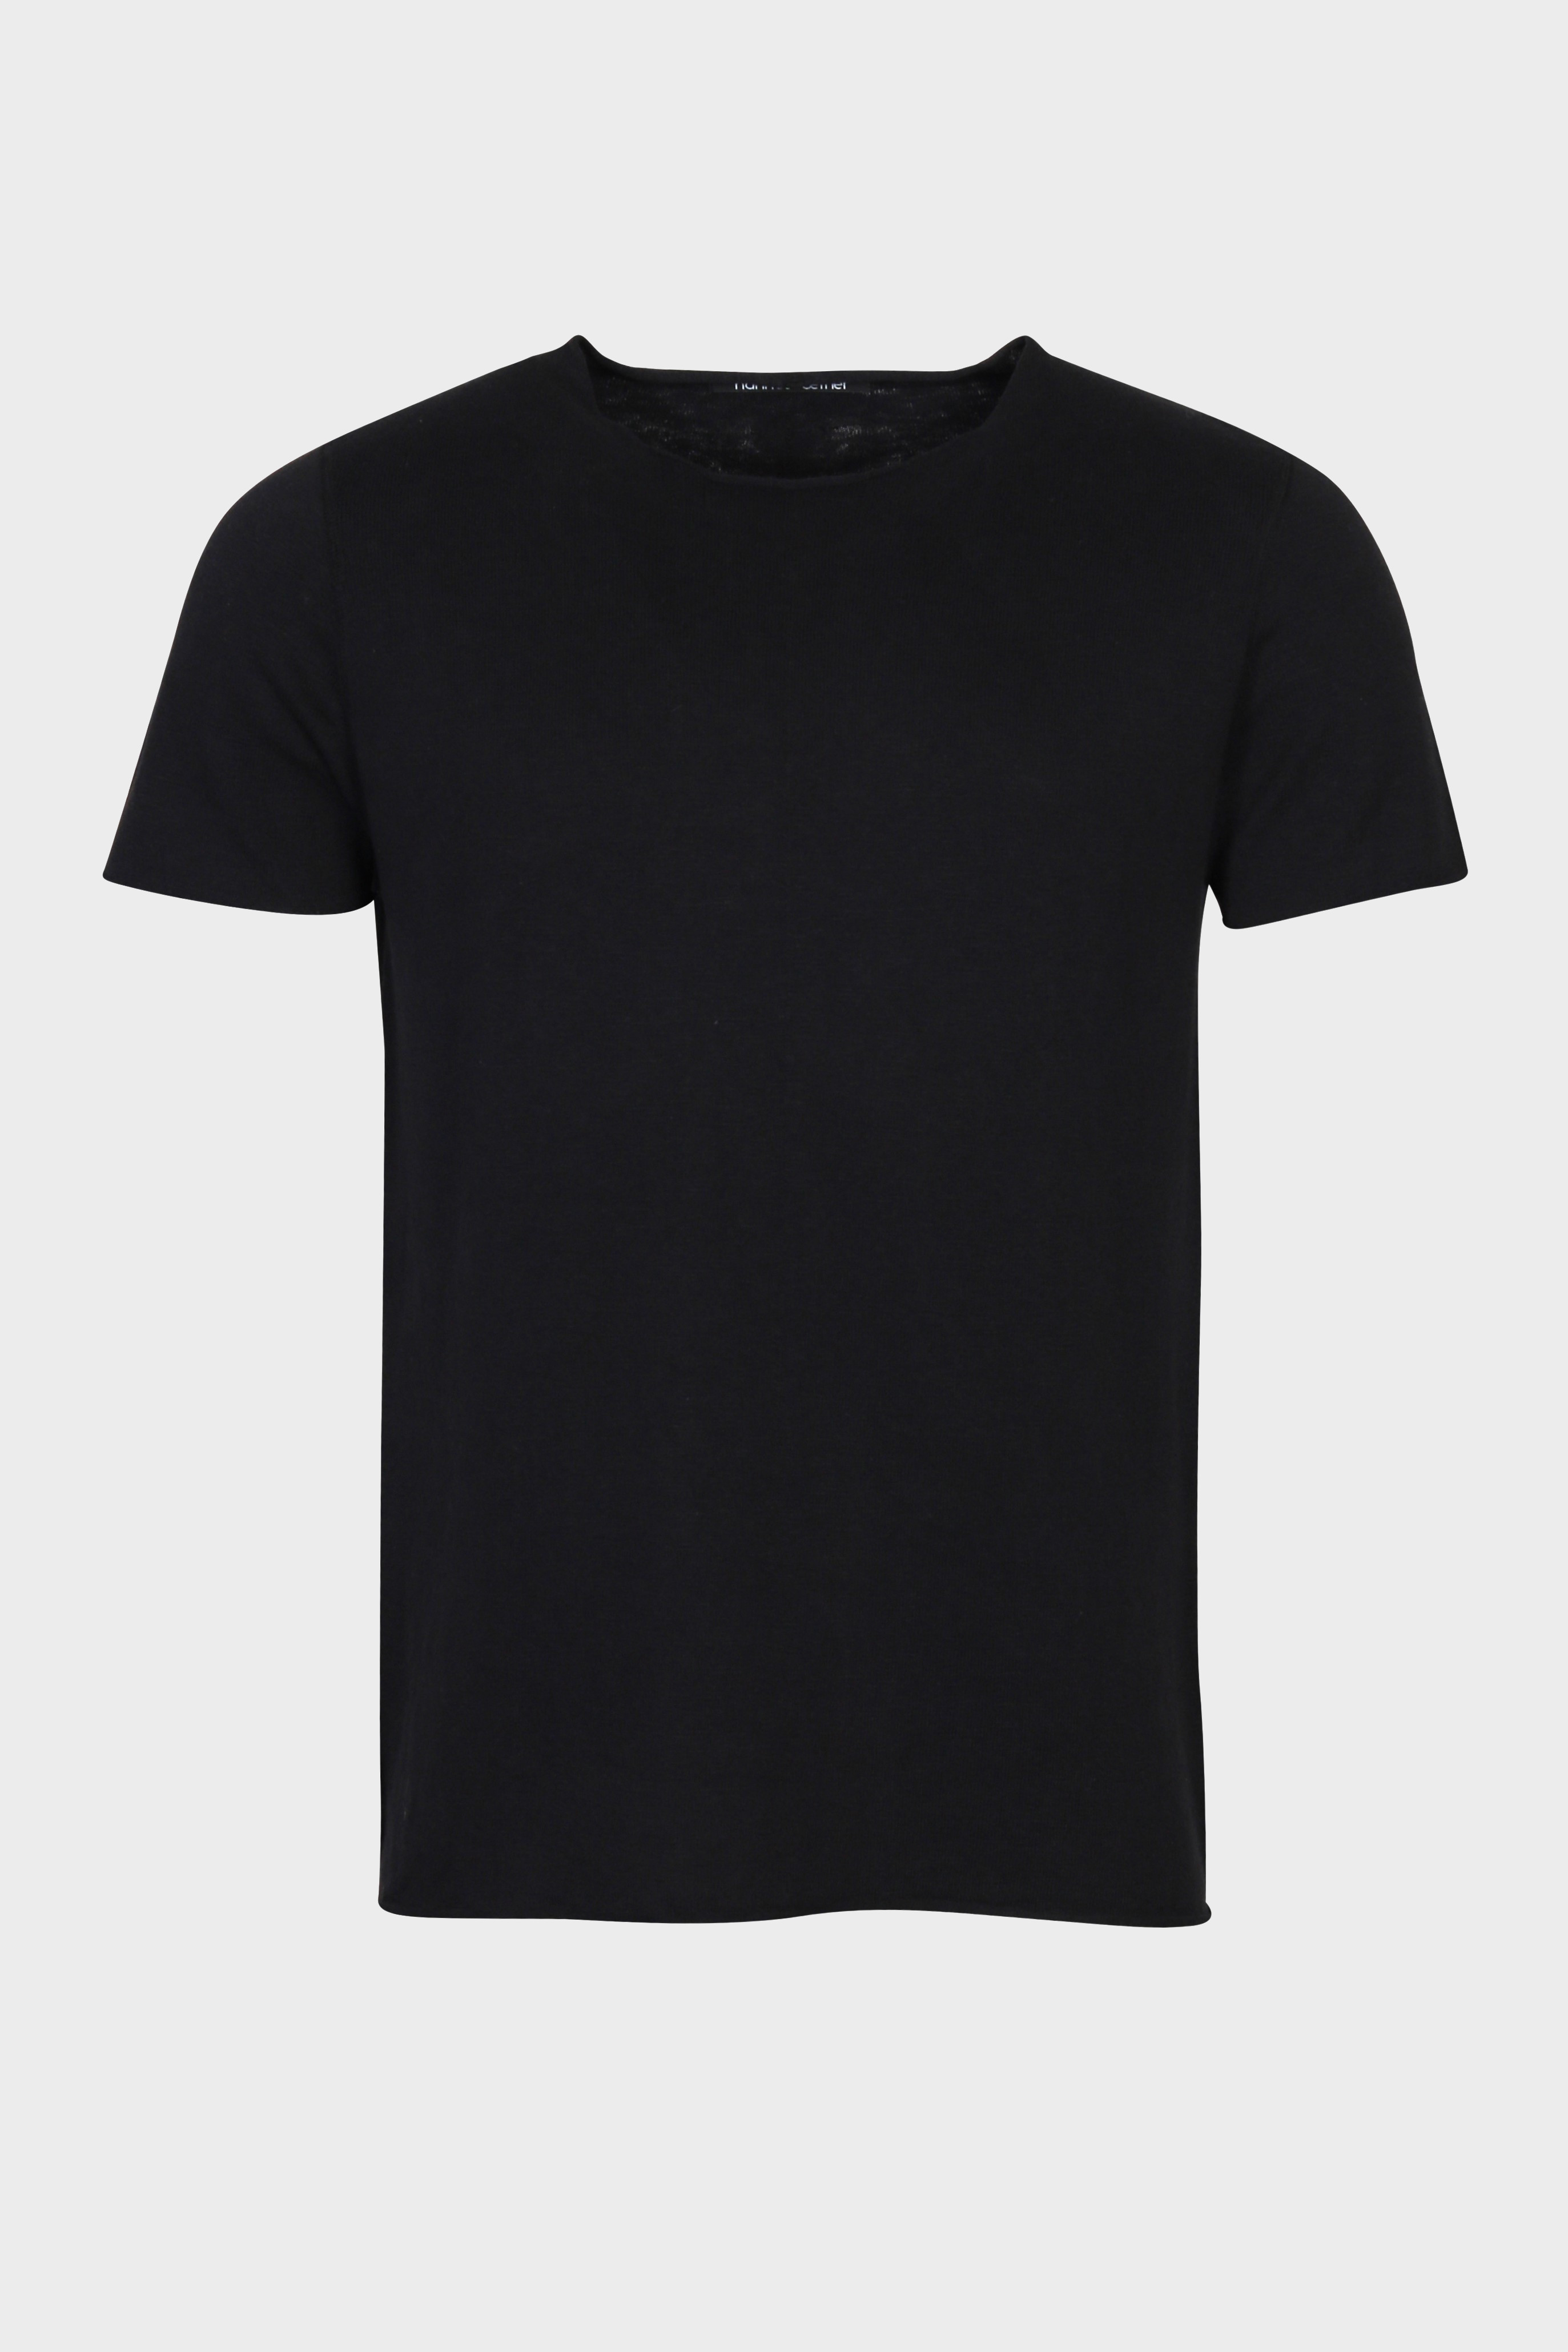 HANNES ROETHER Knit T-Shirt in Black